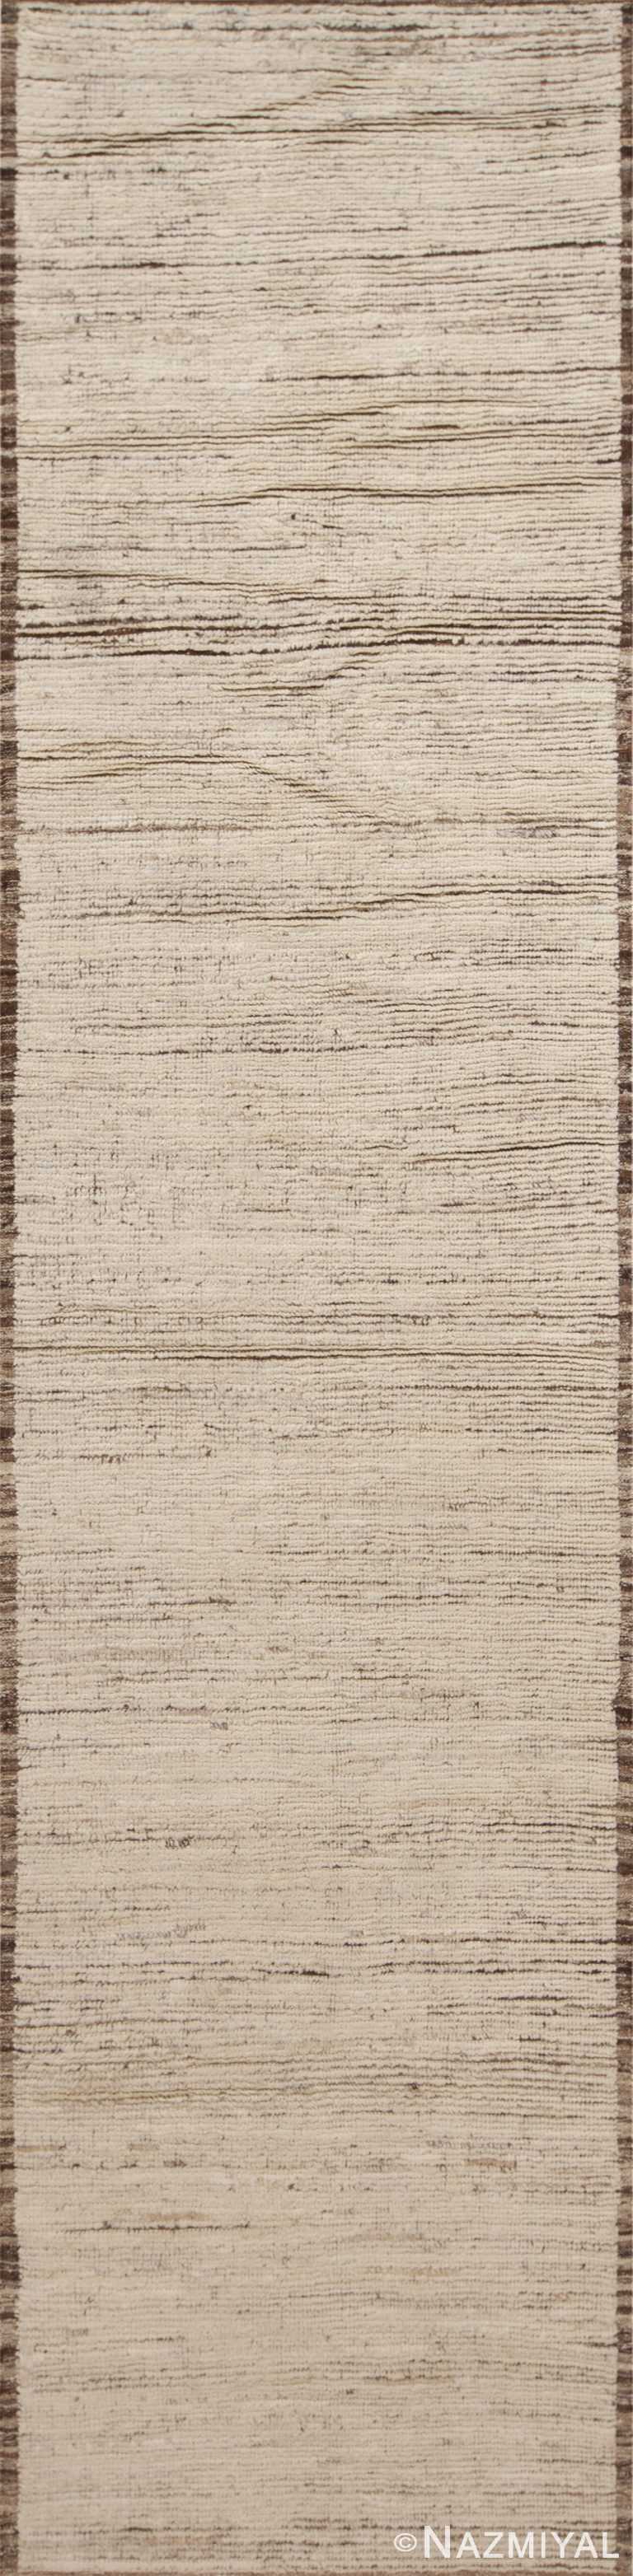 Abstract Solid Ivory Cream Background Modern Minimalist Hallway Runner Rug 11145 by Nazmiyal Antique rugs